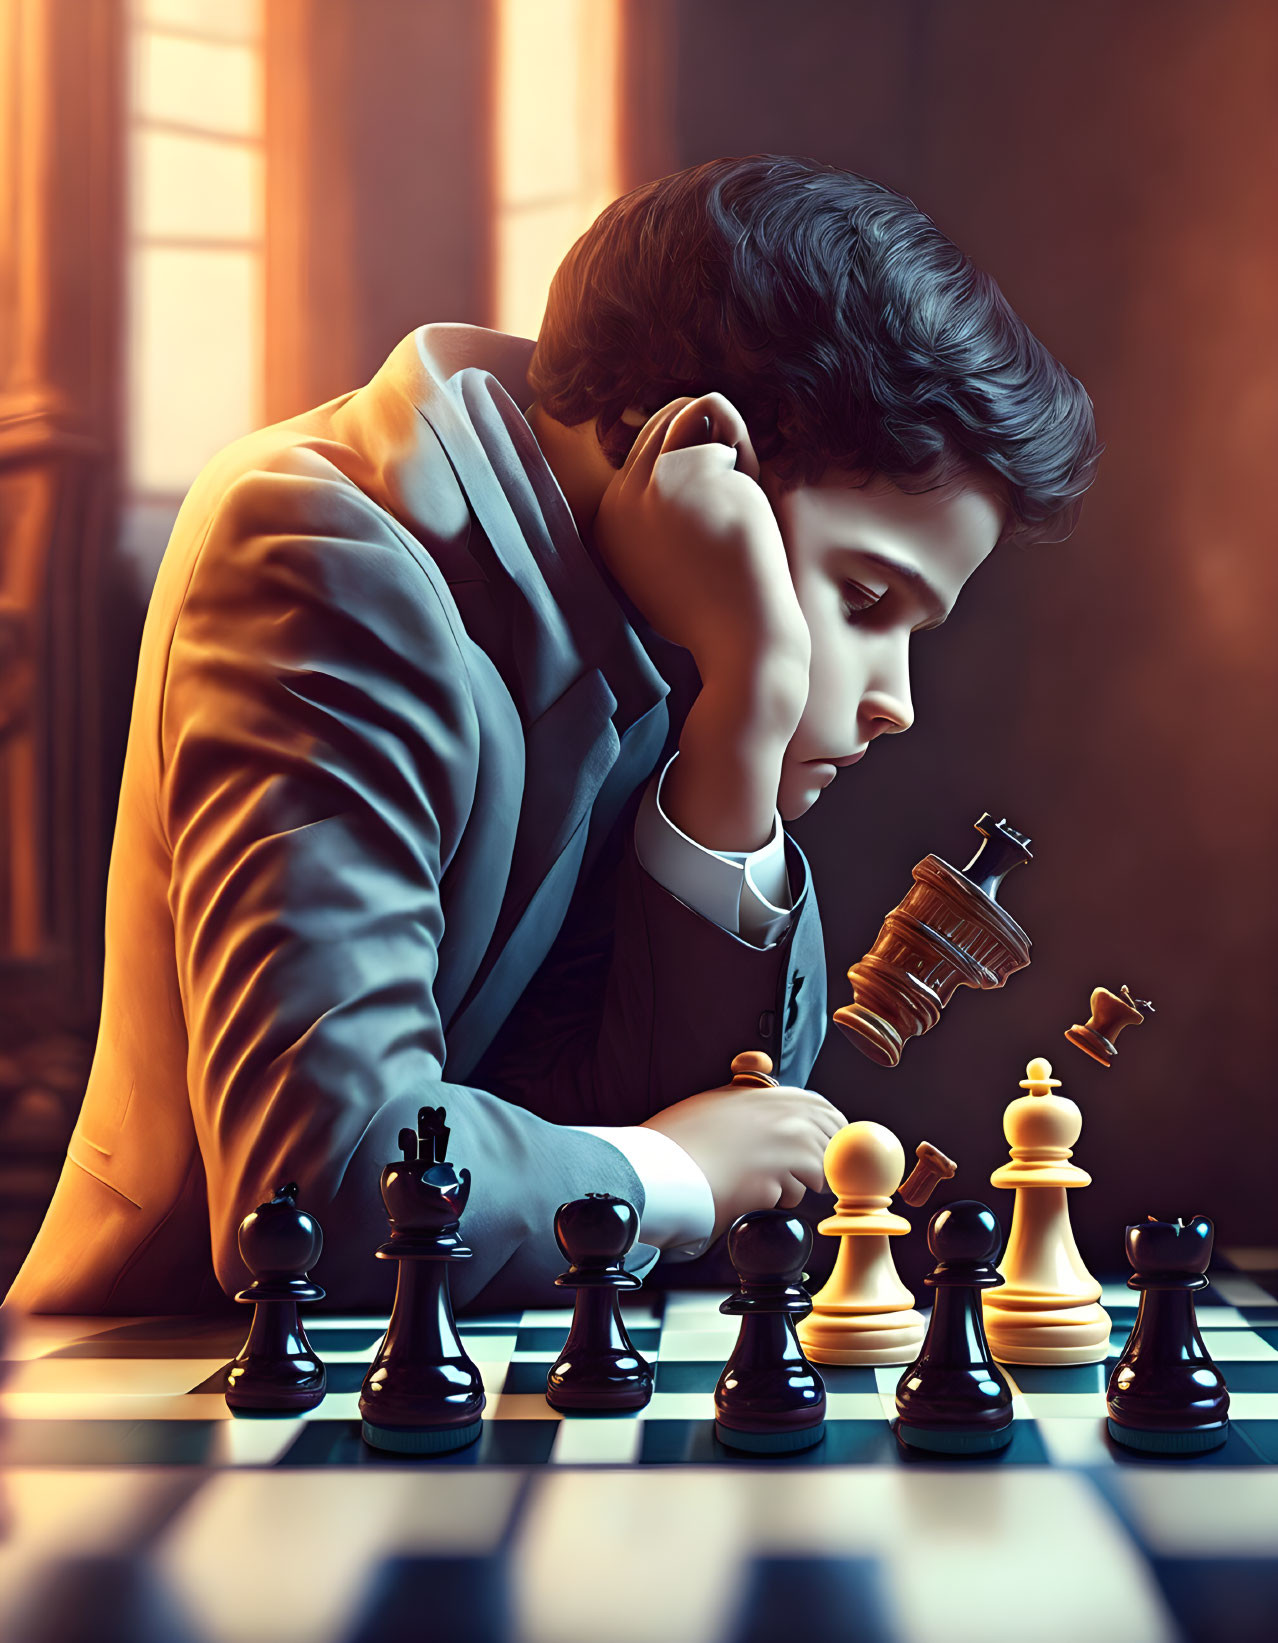 Young man in suit contemplates chessboard with black queen piece